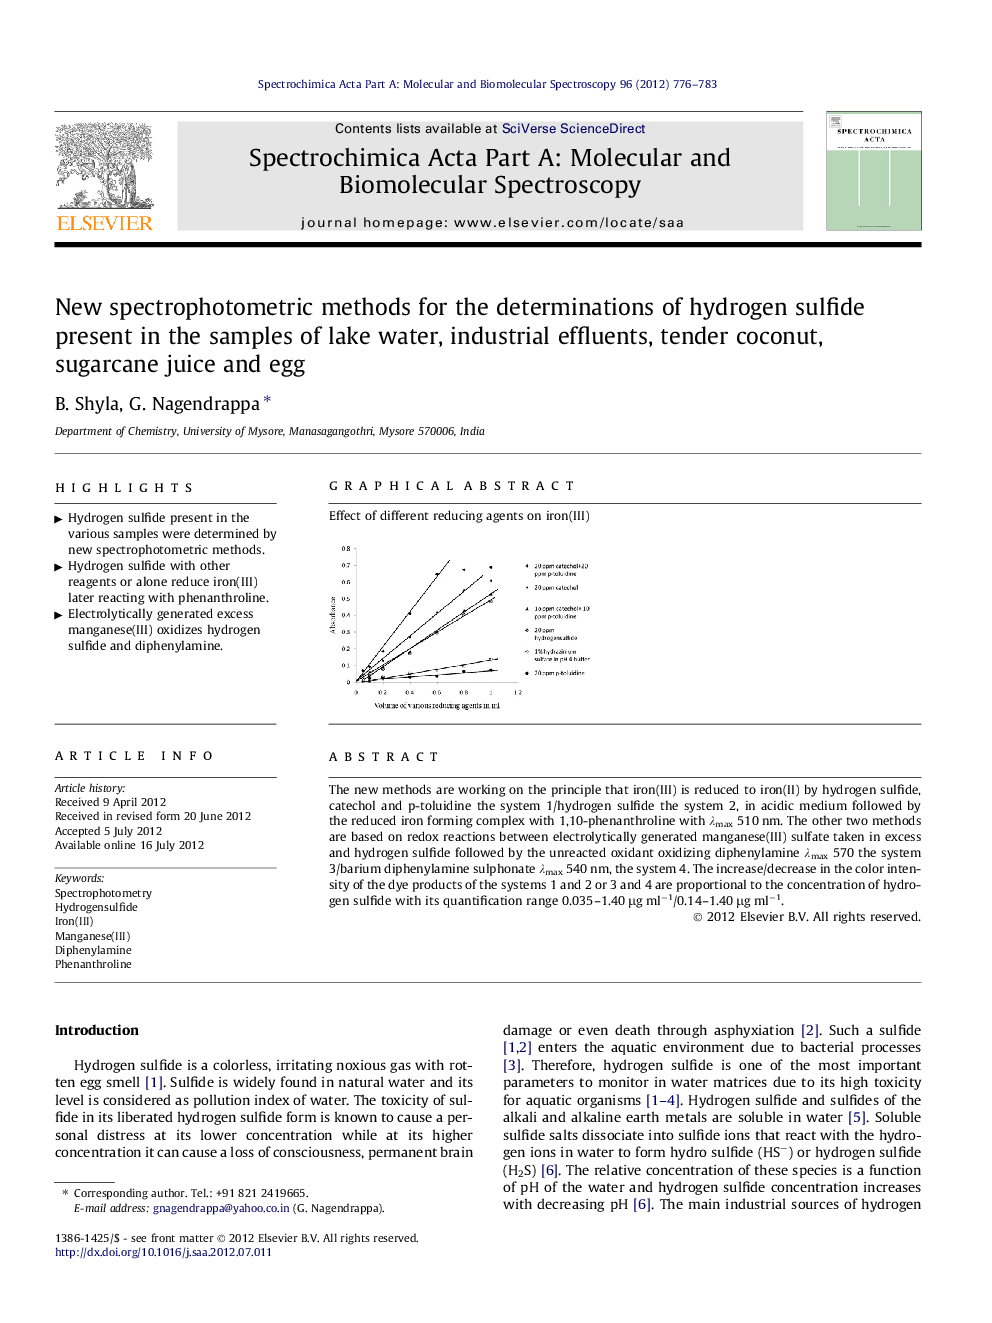 New spectrophotometric methods for the determinations of hydrogen sulfide present in the samples of lake water, industrial effluents, tender coconut, sugarcane juice and egg